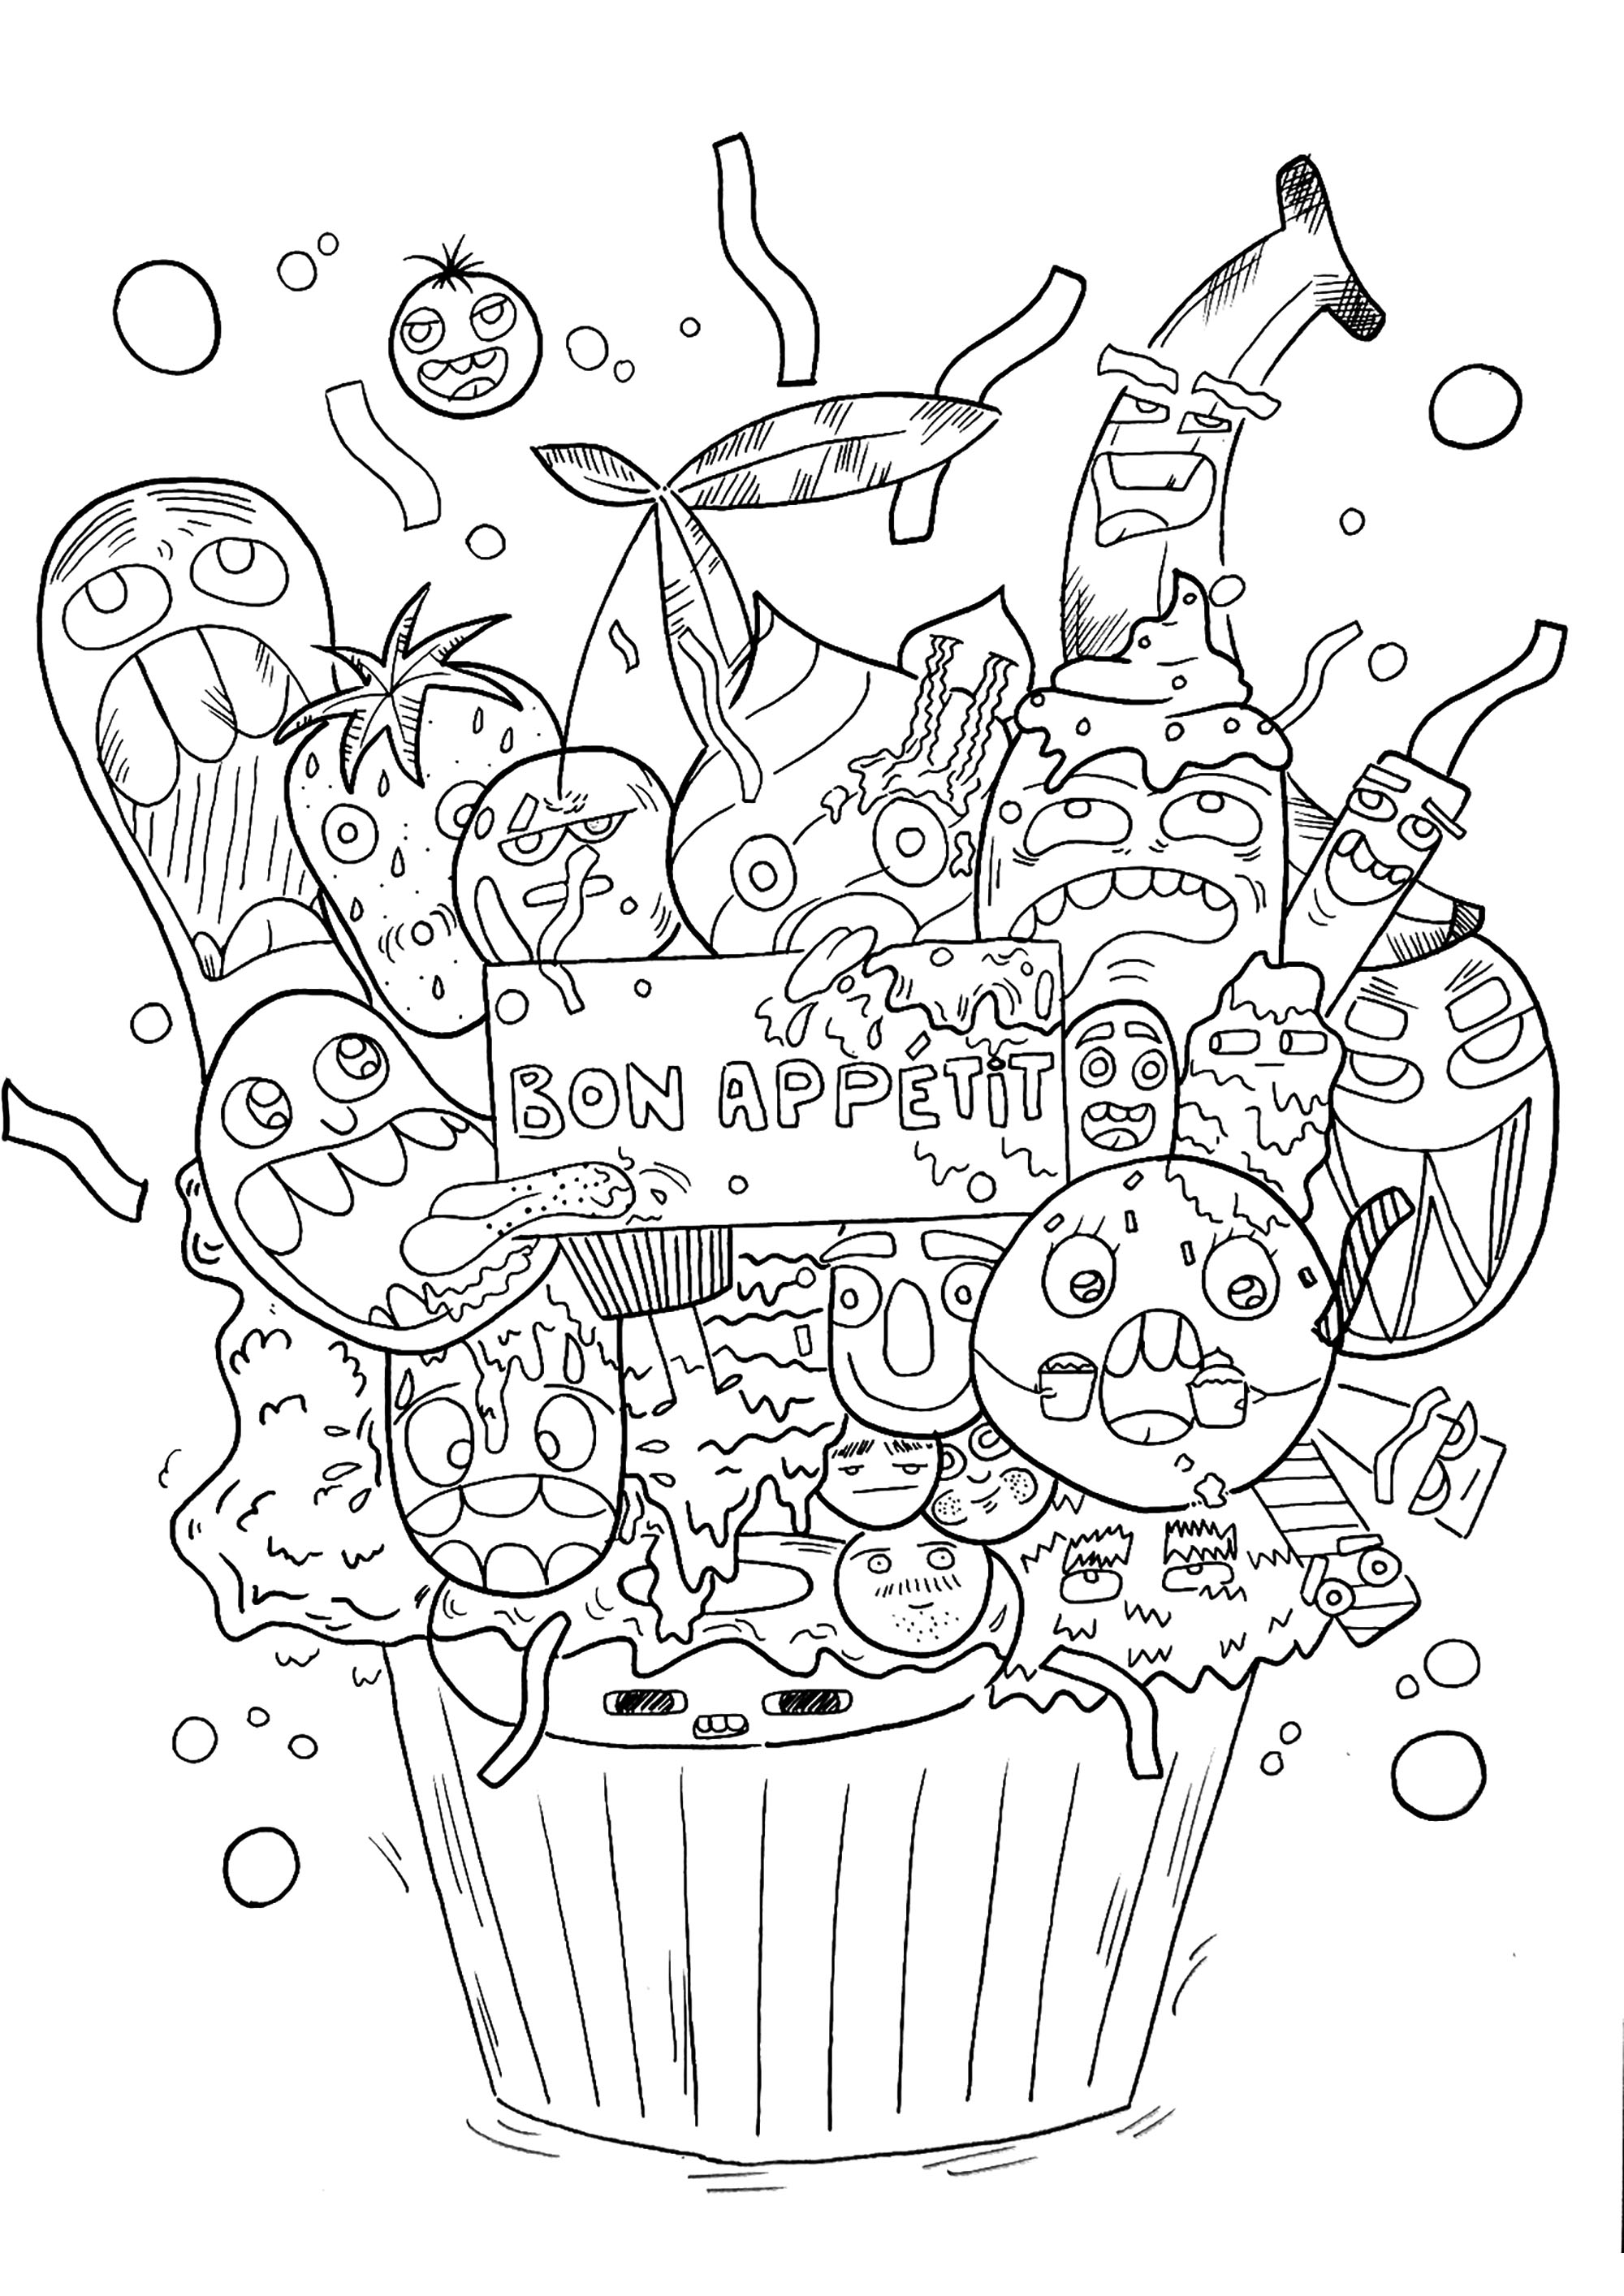 This huge cupcake is perfect for a little sweet break!, Artist : Lea